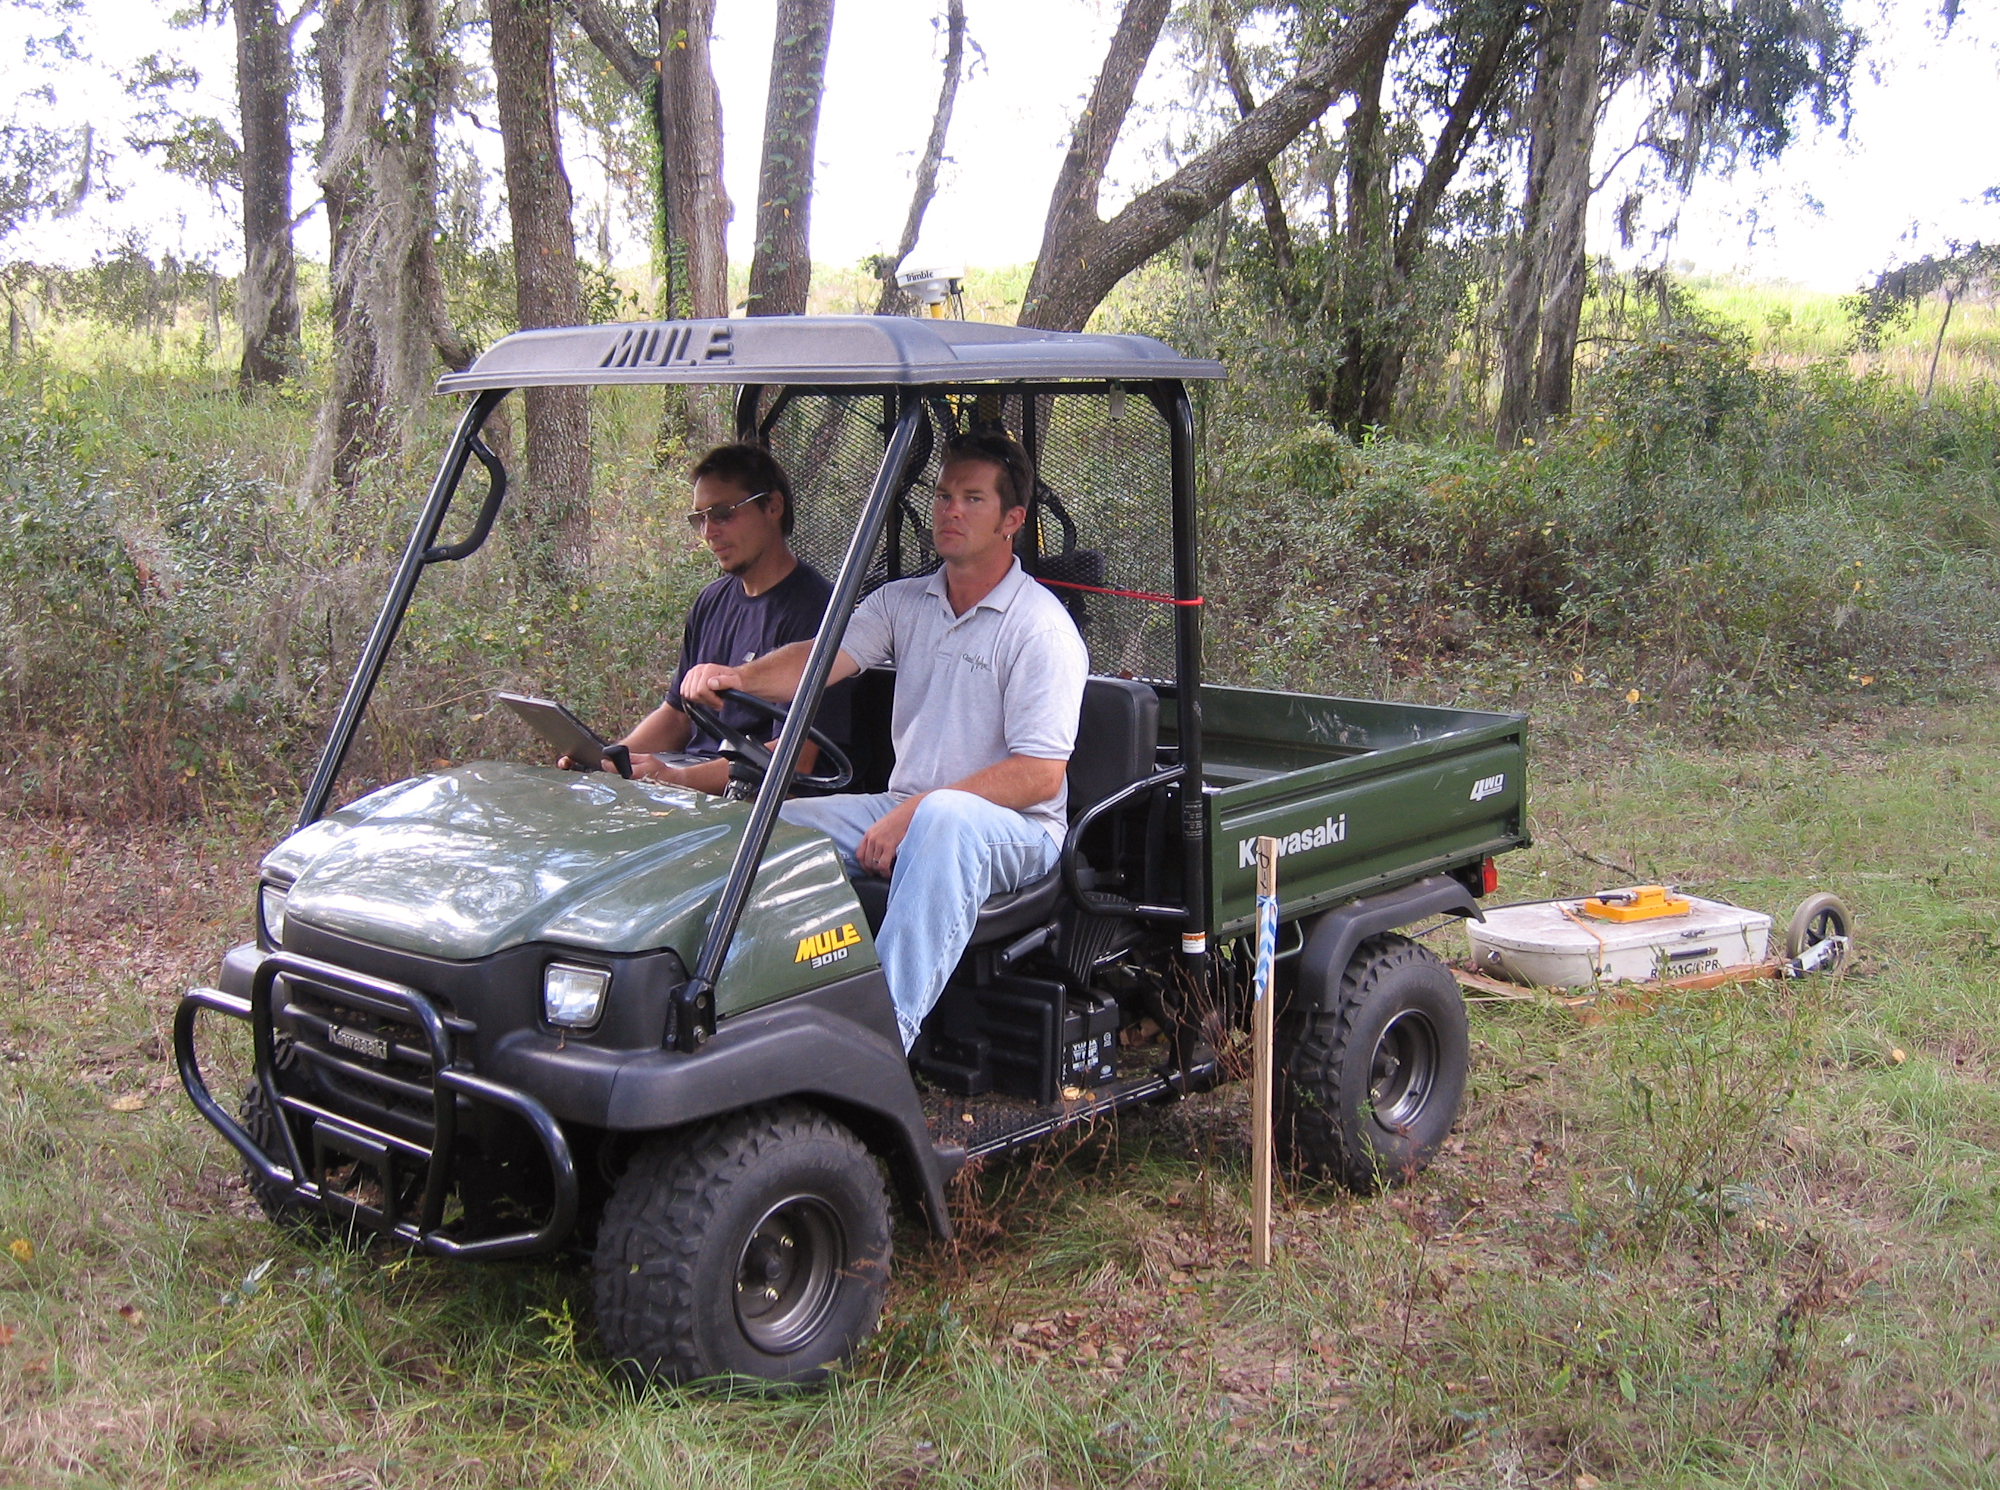 GPR Survey with an all-terrain vehicle